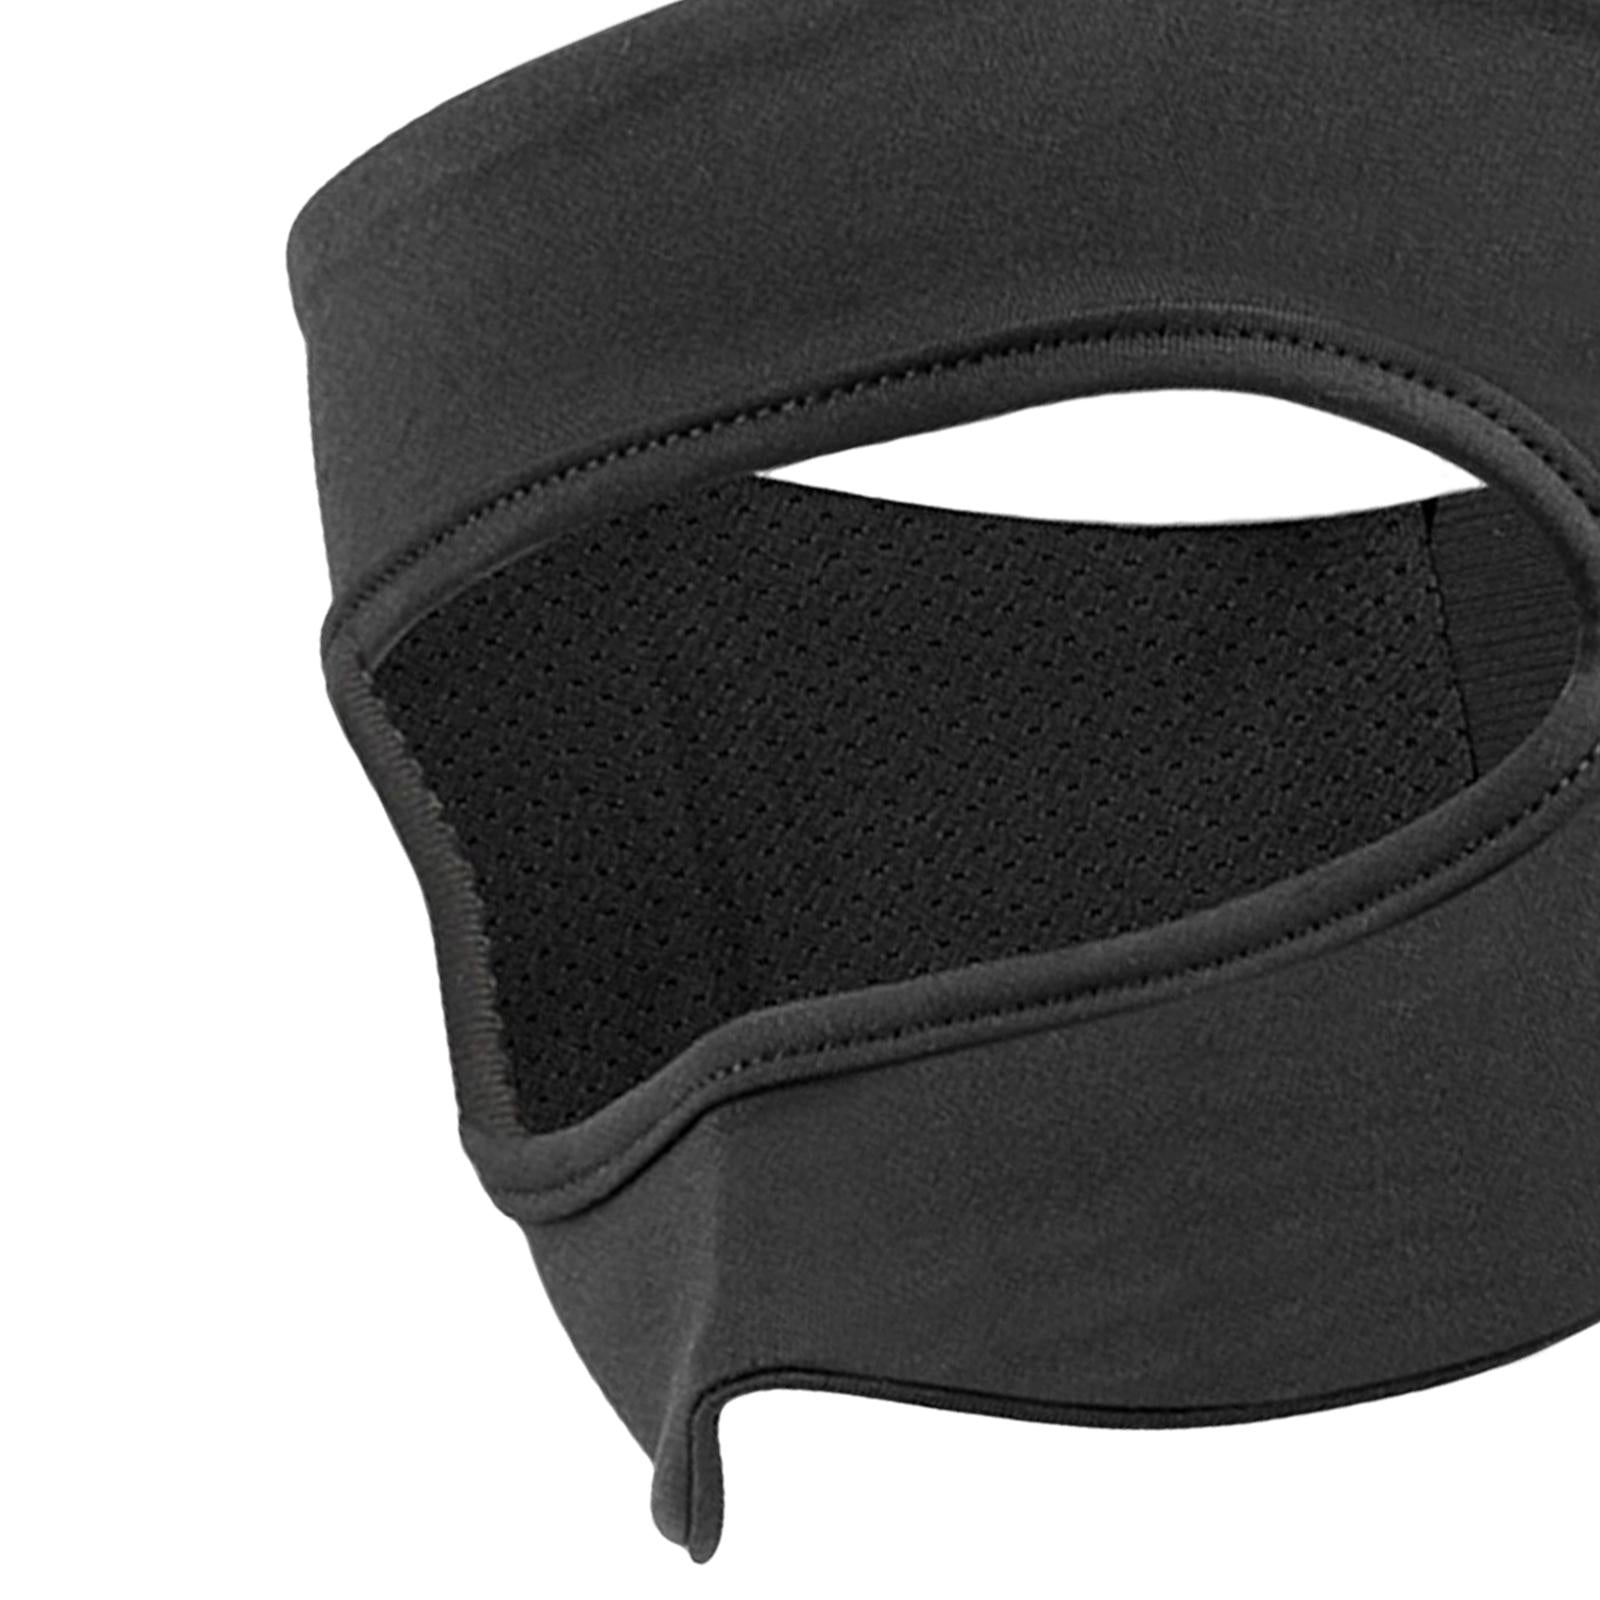 Virtual Reality VR Masks for Quest 2 Elastic Material Home Supplies Black